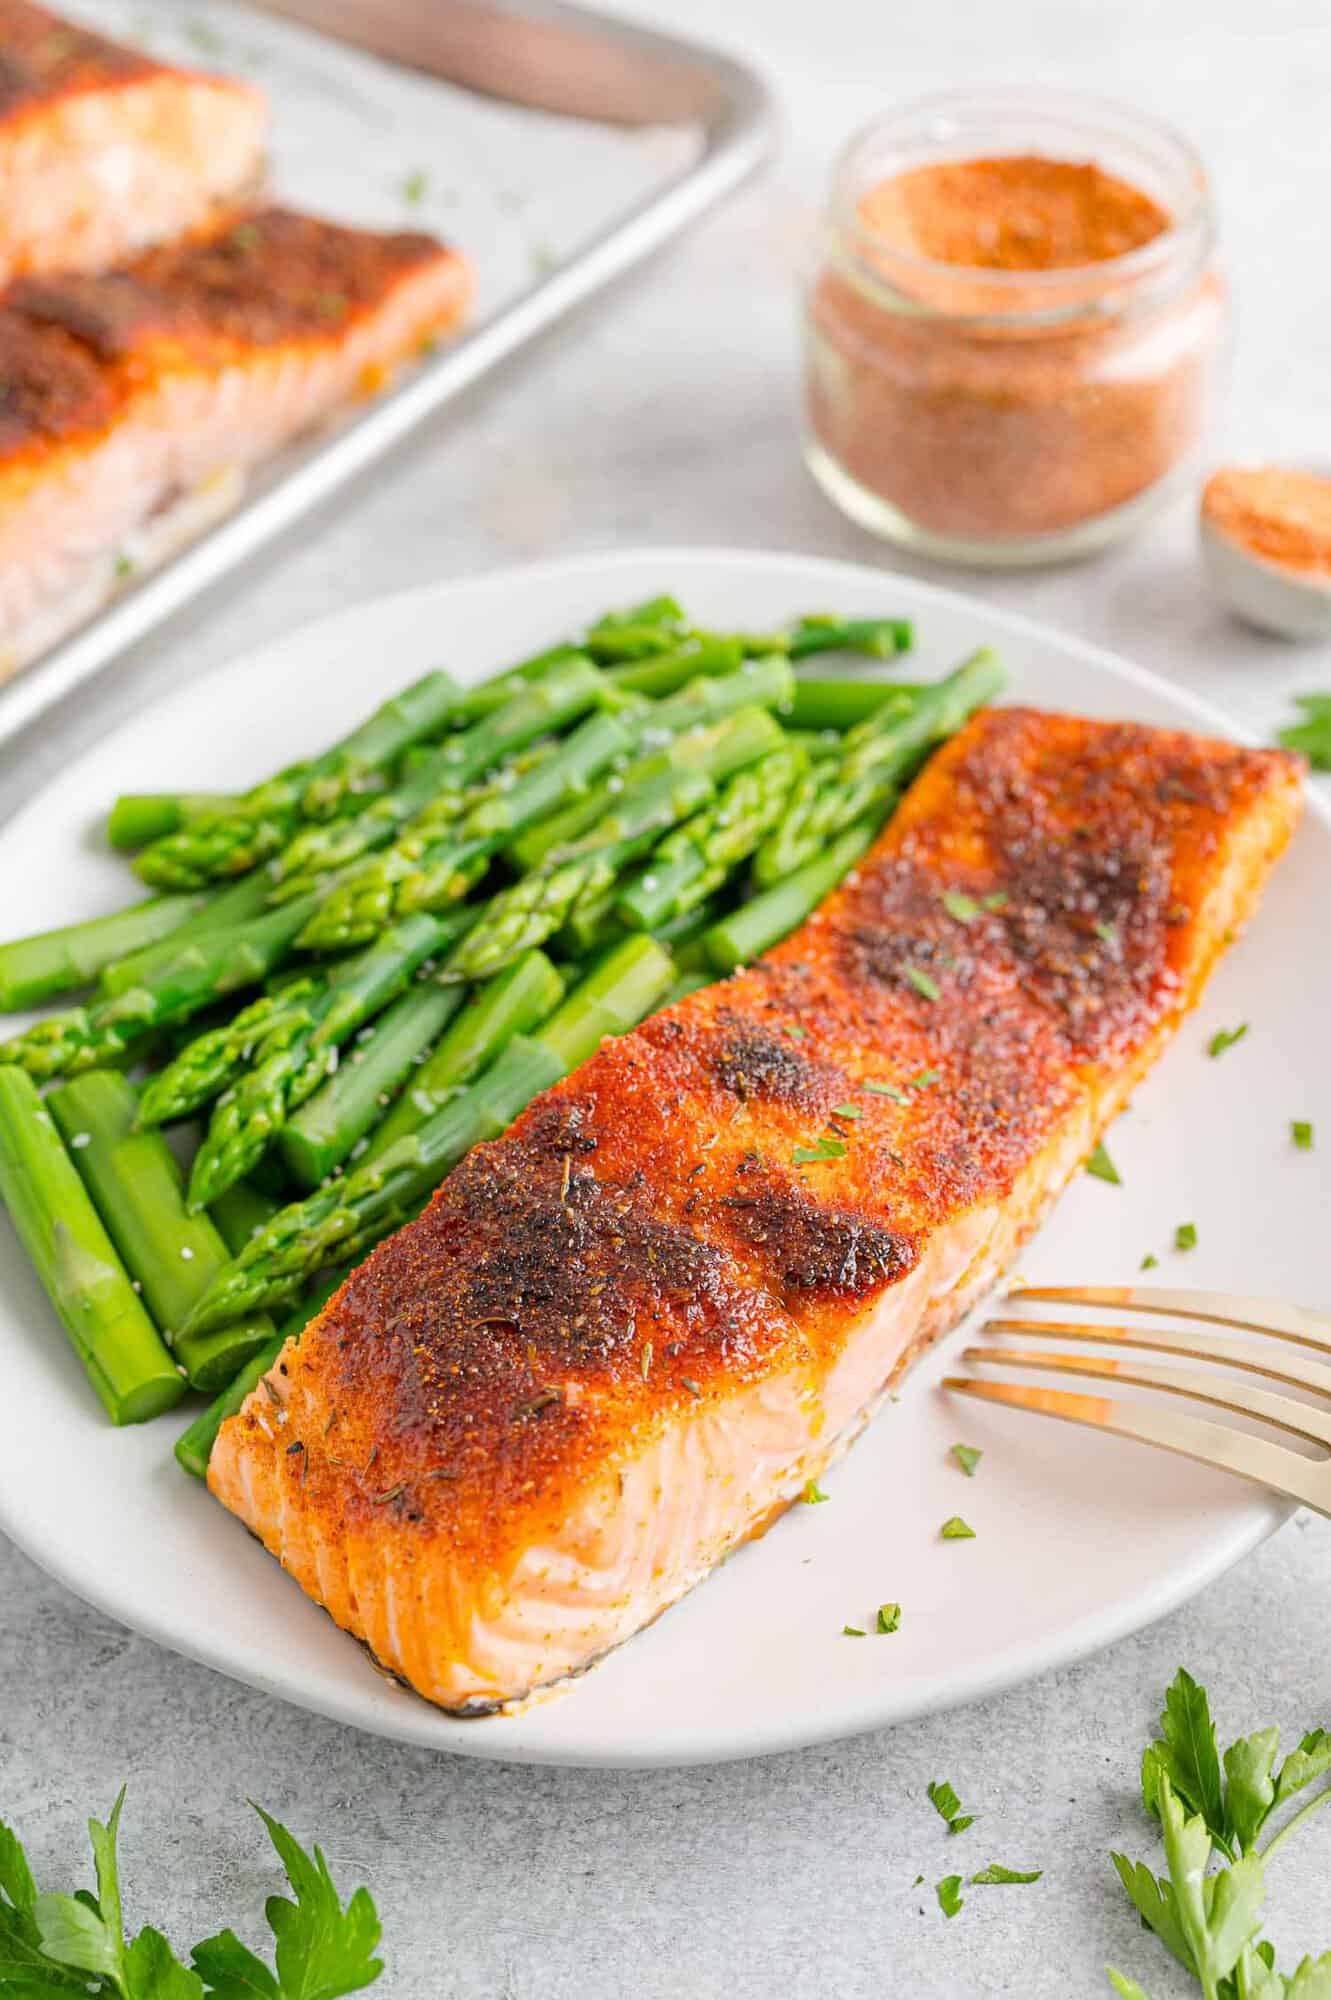 A broiled salmon filet with a side of green beans on a white plate.